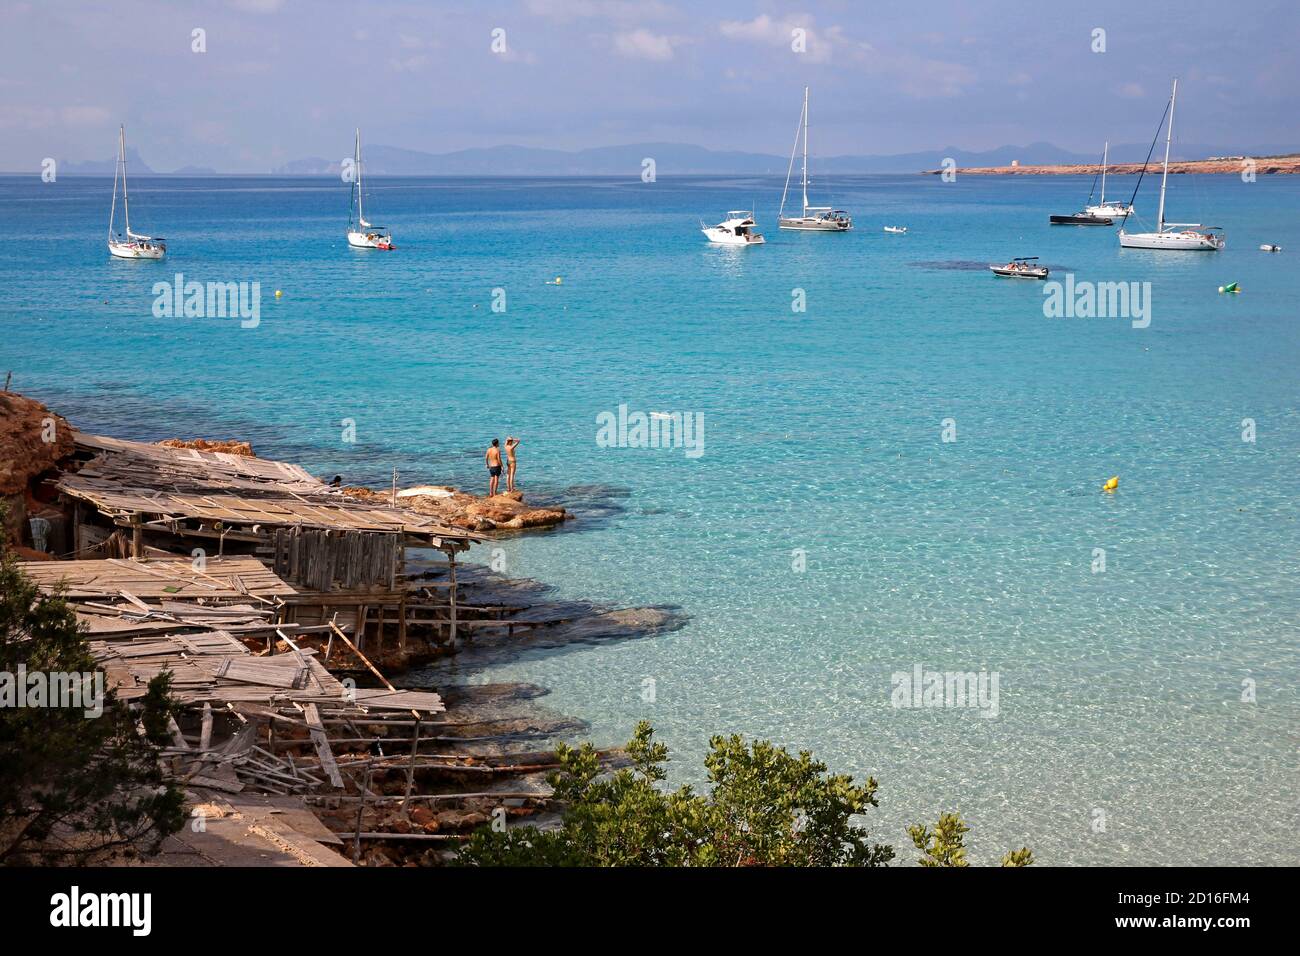 Spain, Balearic islands, formentera, Cala Saona, couple in swimming costume at the foot of of boat sheds watching sailboats mooring in turquoise water Stock Photo